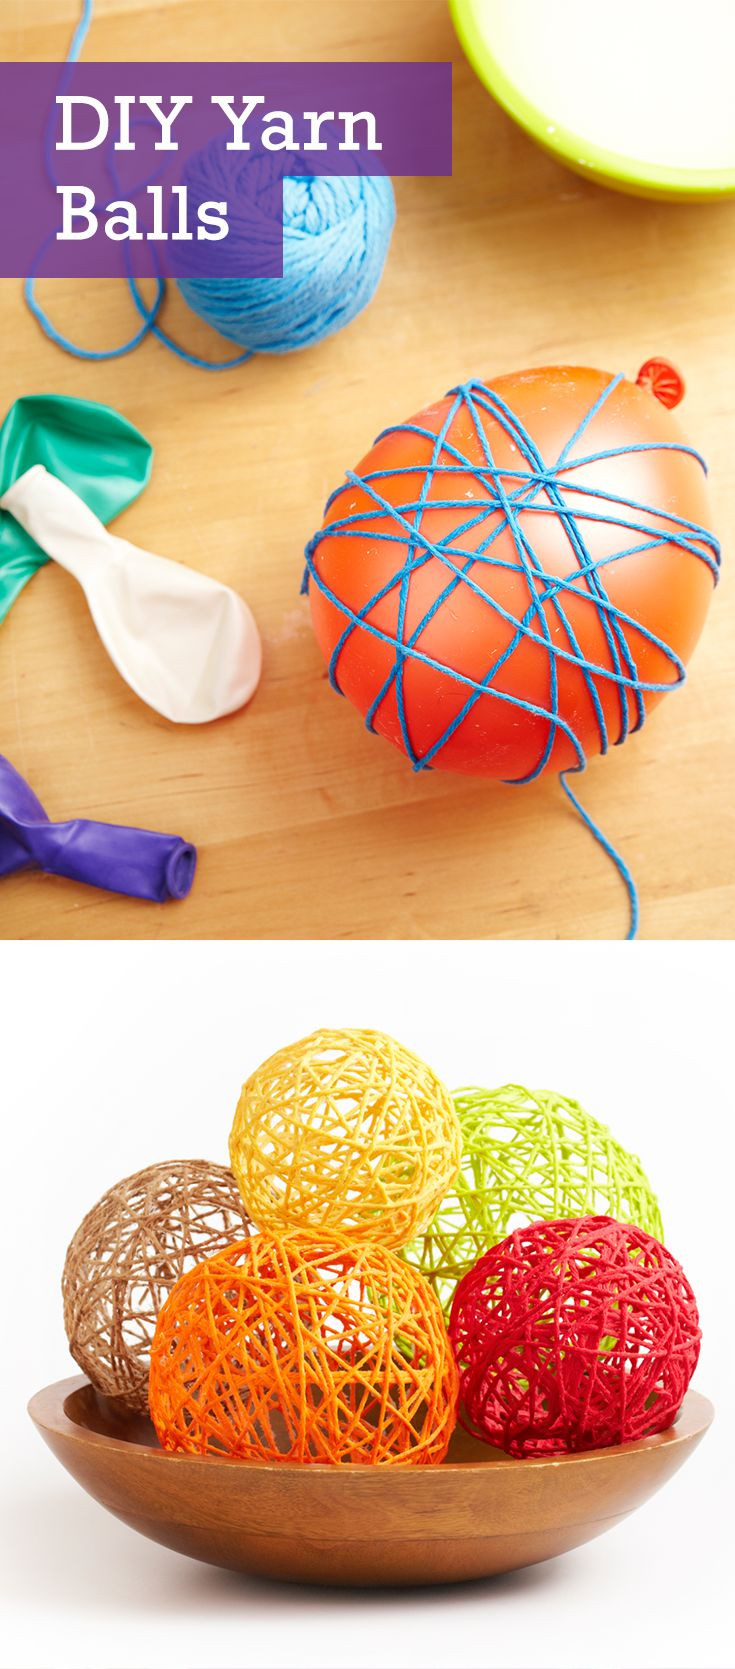 The 20 Best Ideas for Easy Fun Crafts for Adults - Home Inspiration and